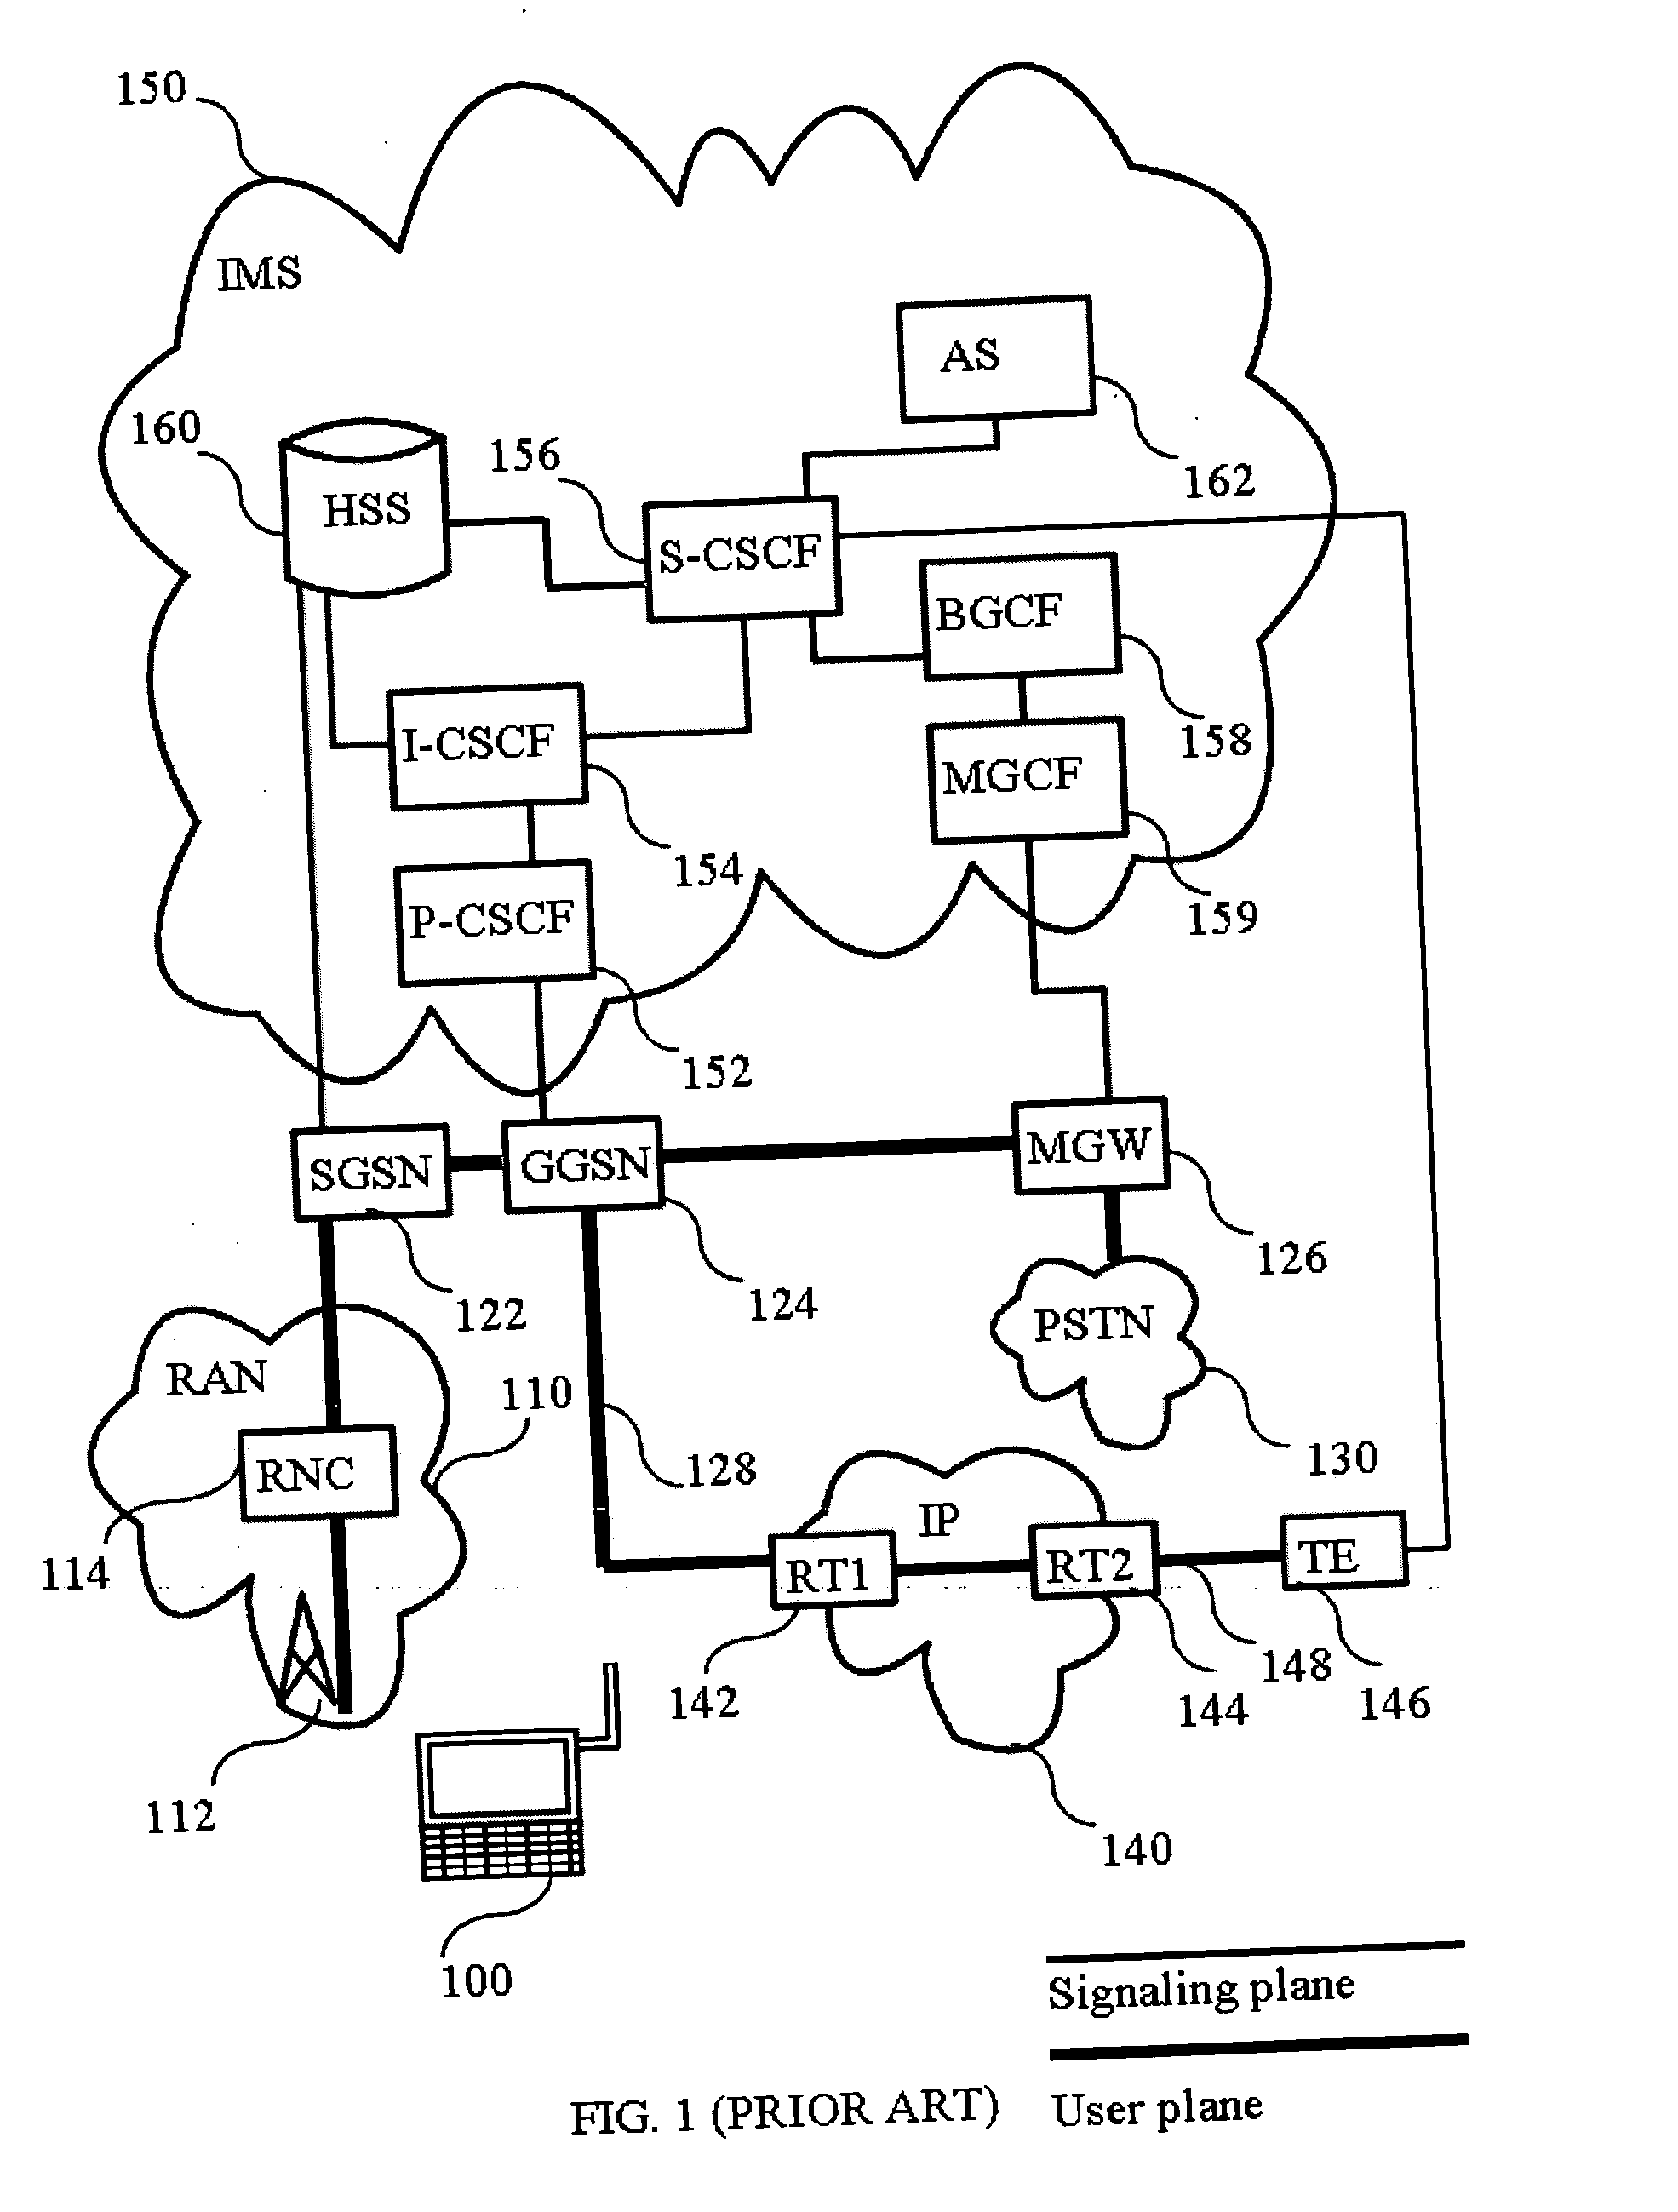 Method for the mapping of packet flows to bearers in a communication system